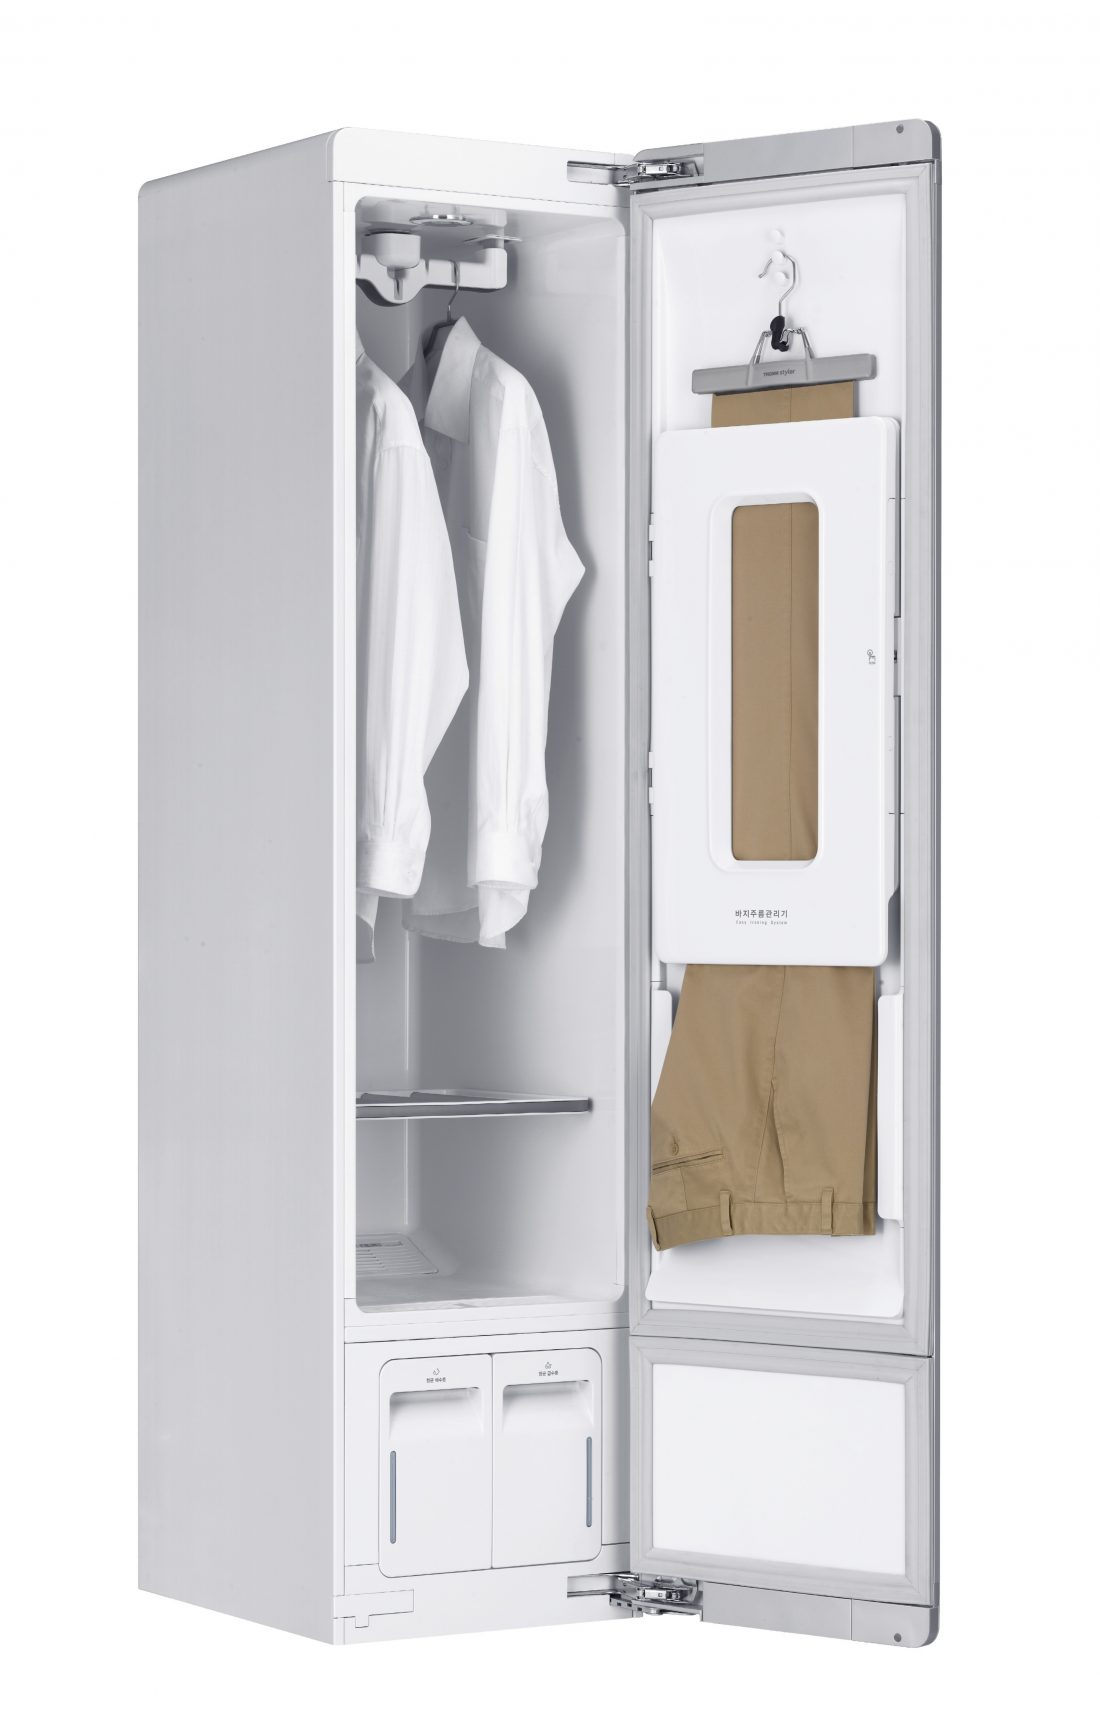 The LG Styler steam closet system facing 45 degrees to the right with the door open